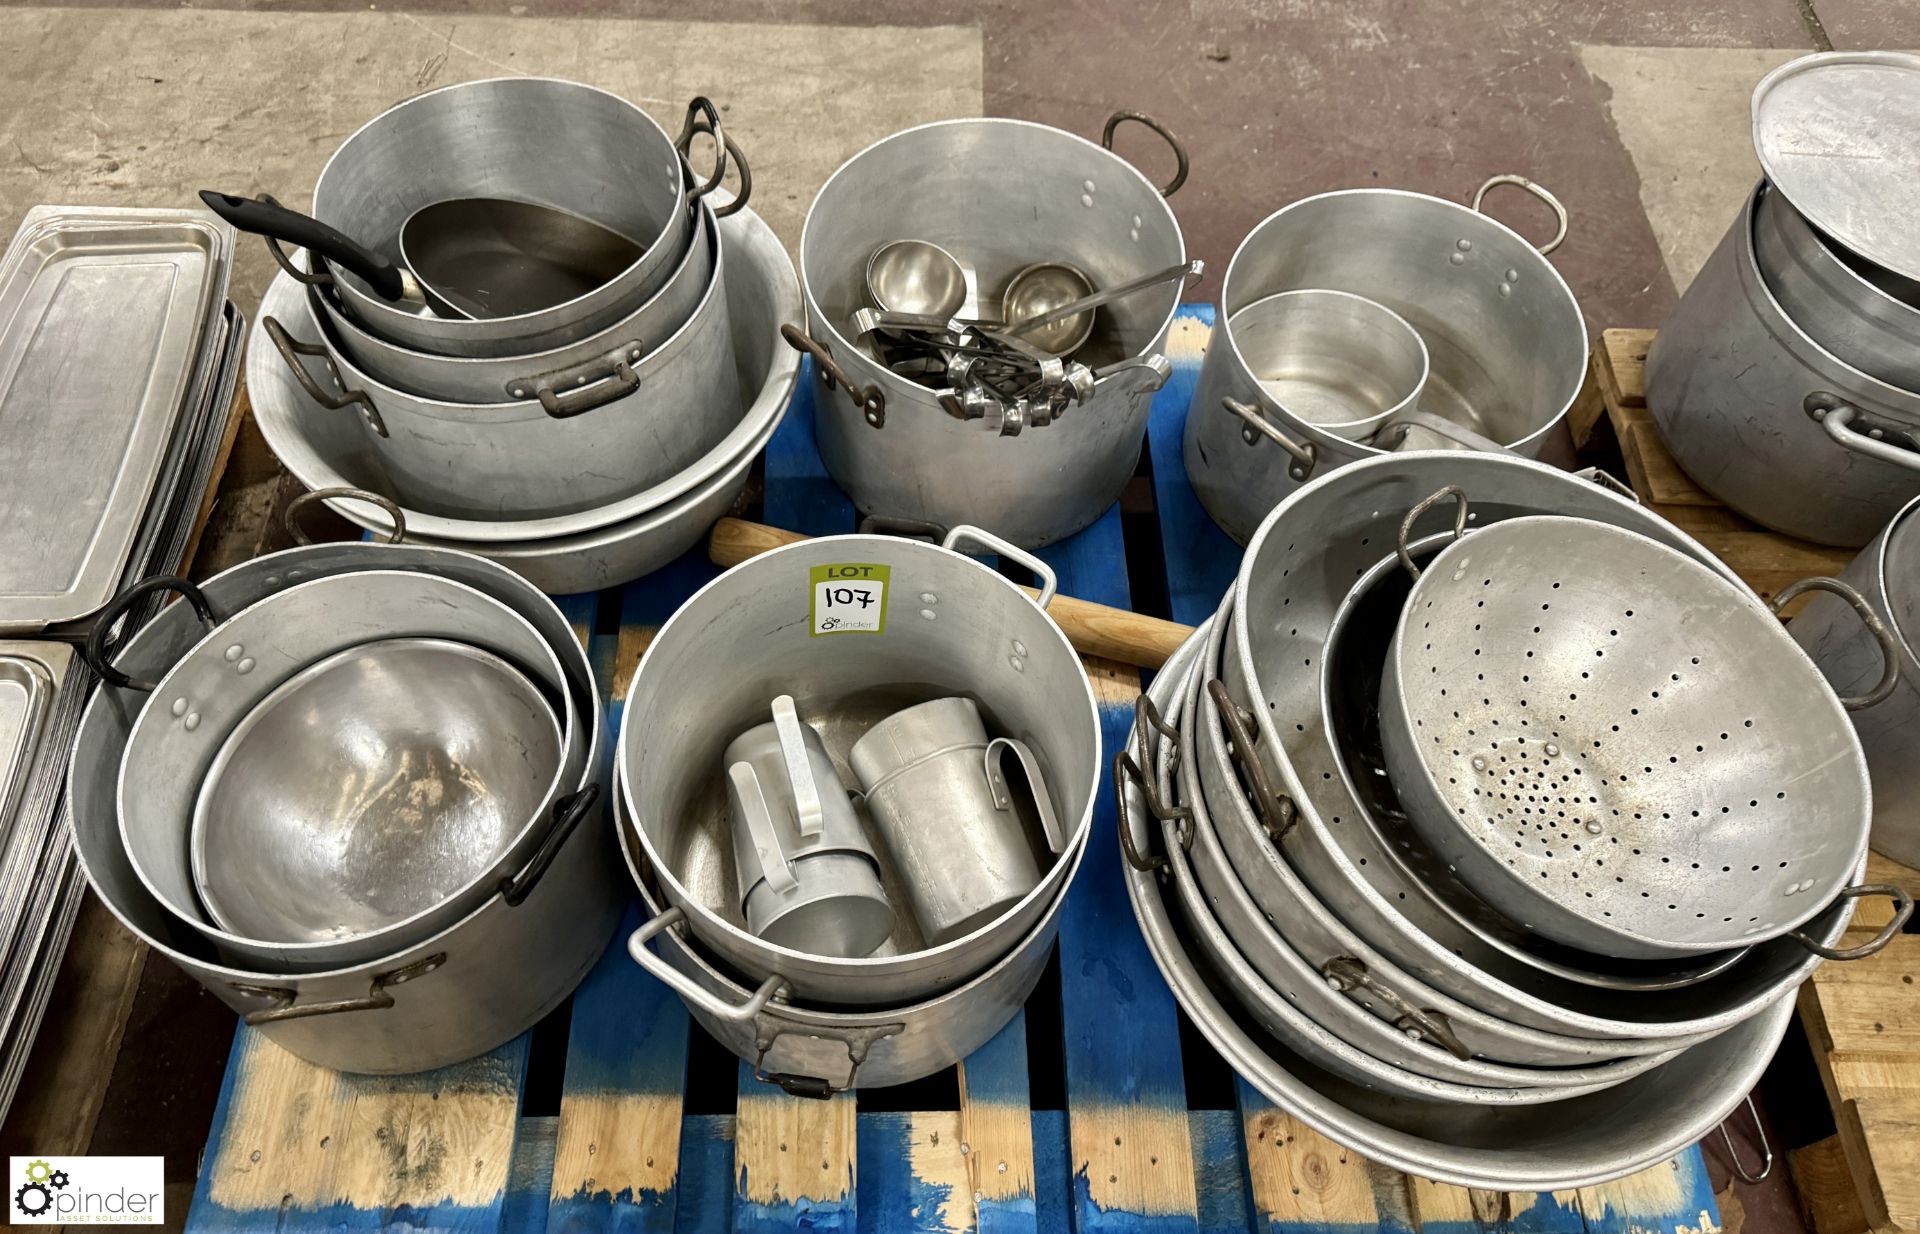 Quantity Cooking Pots, Bowls and Colanders, to pallet - Image 4 of 6